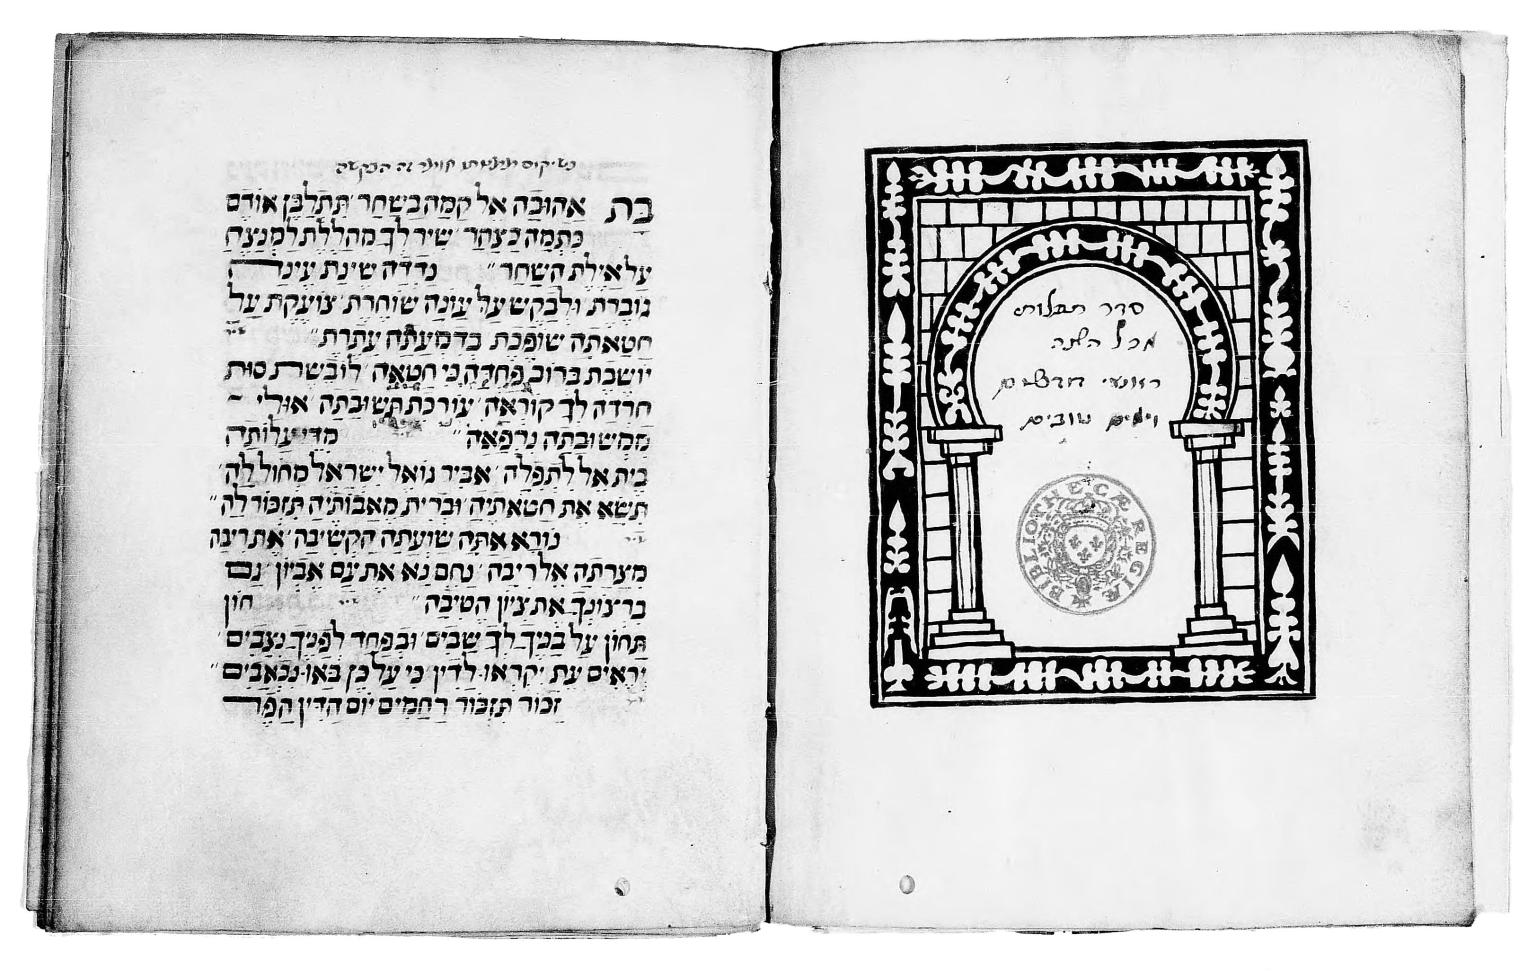 Facing-page manuscript with Hebrew text on left-hand page and image of archway with decorative border on right-hand page. 